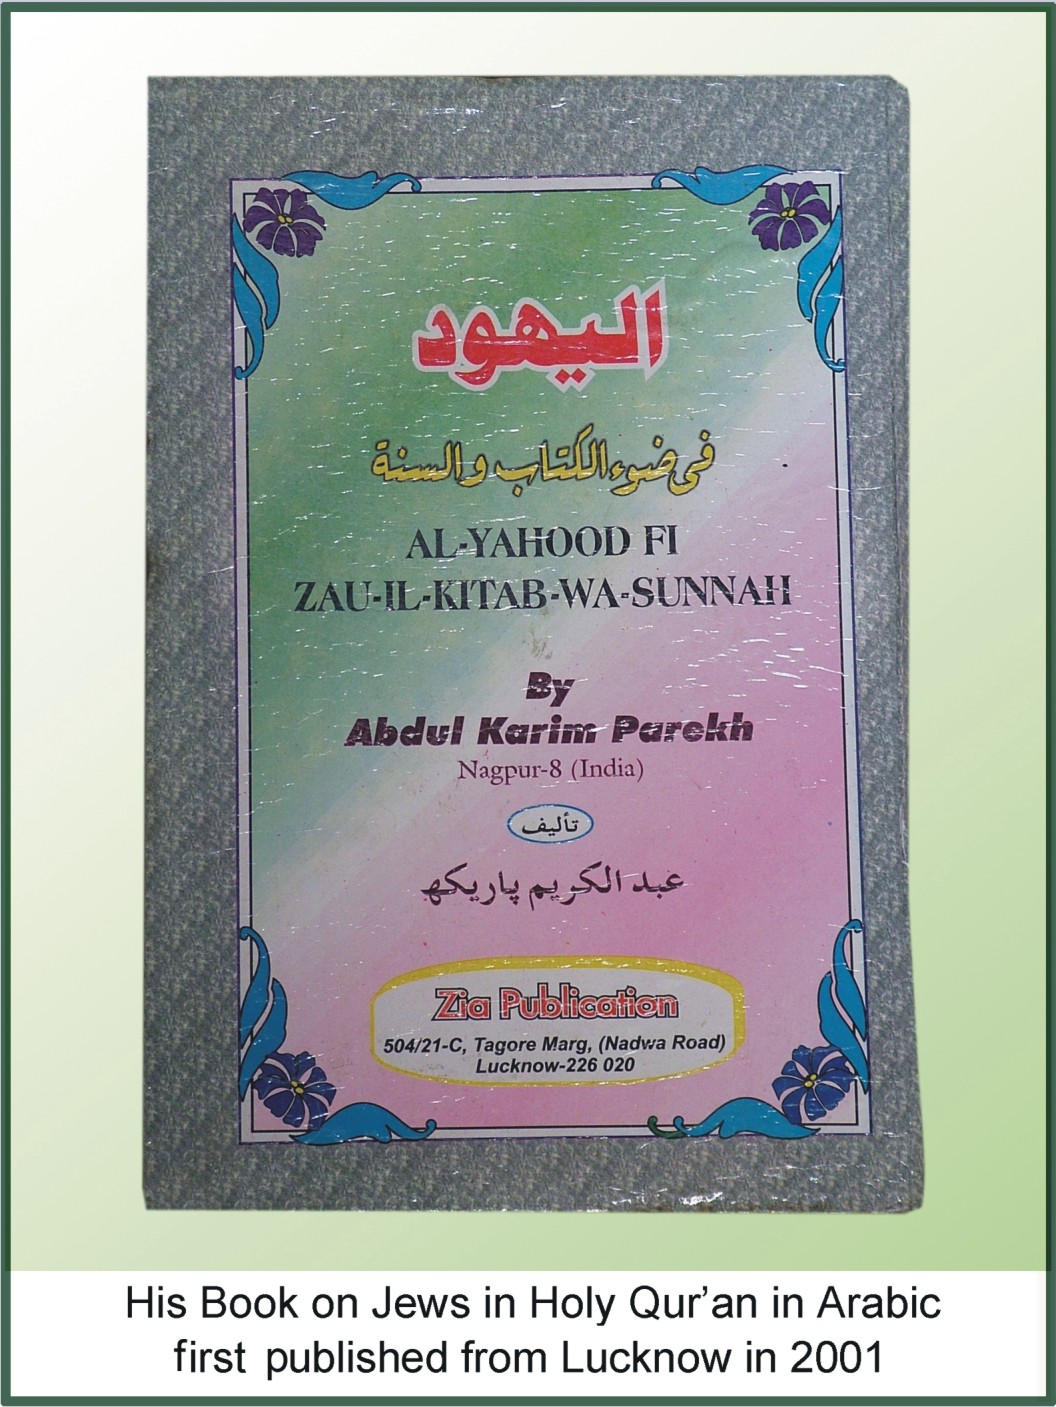 Jews in The Holy Qur'an (Arabic) First Published from Lucknow in 2001